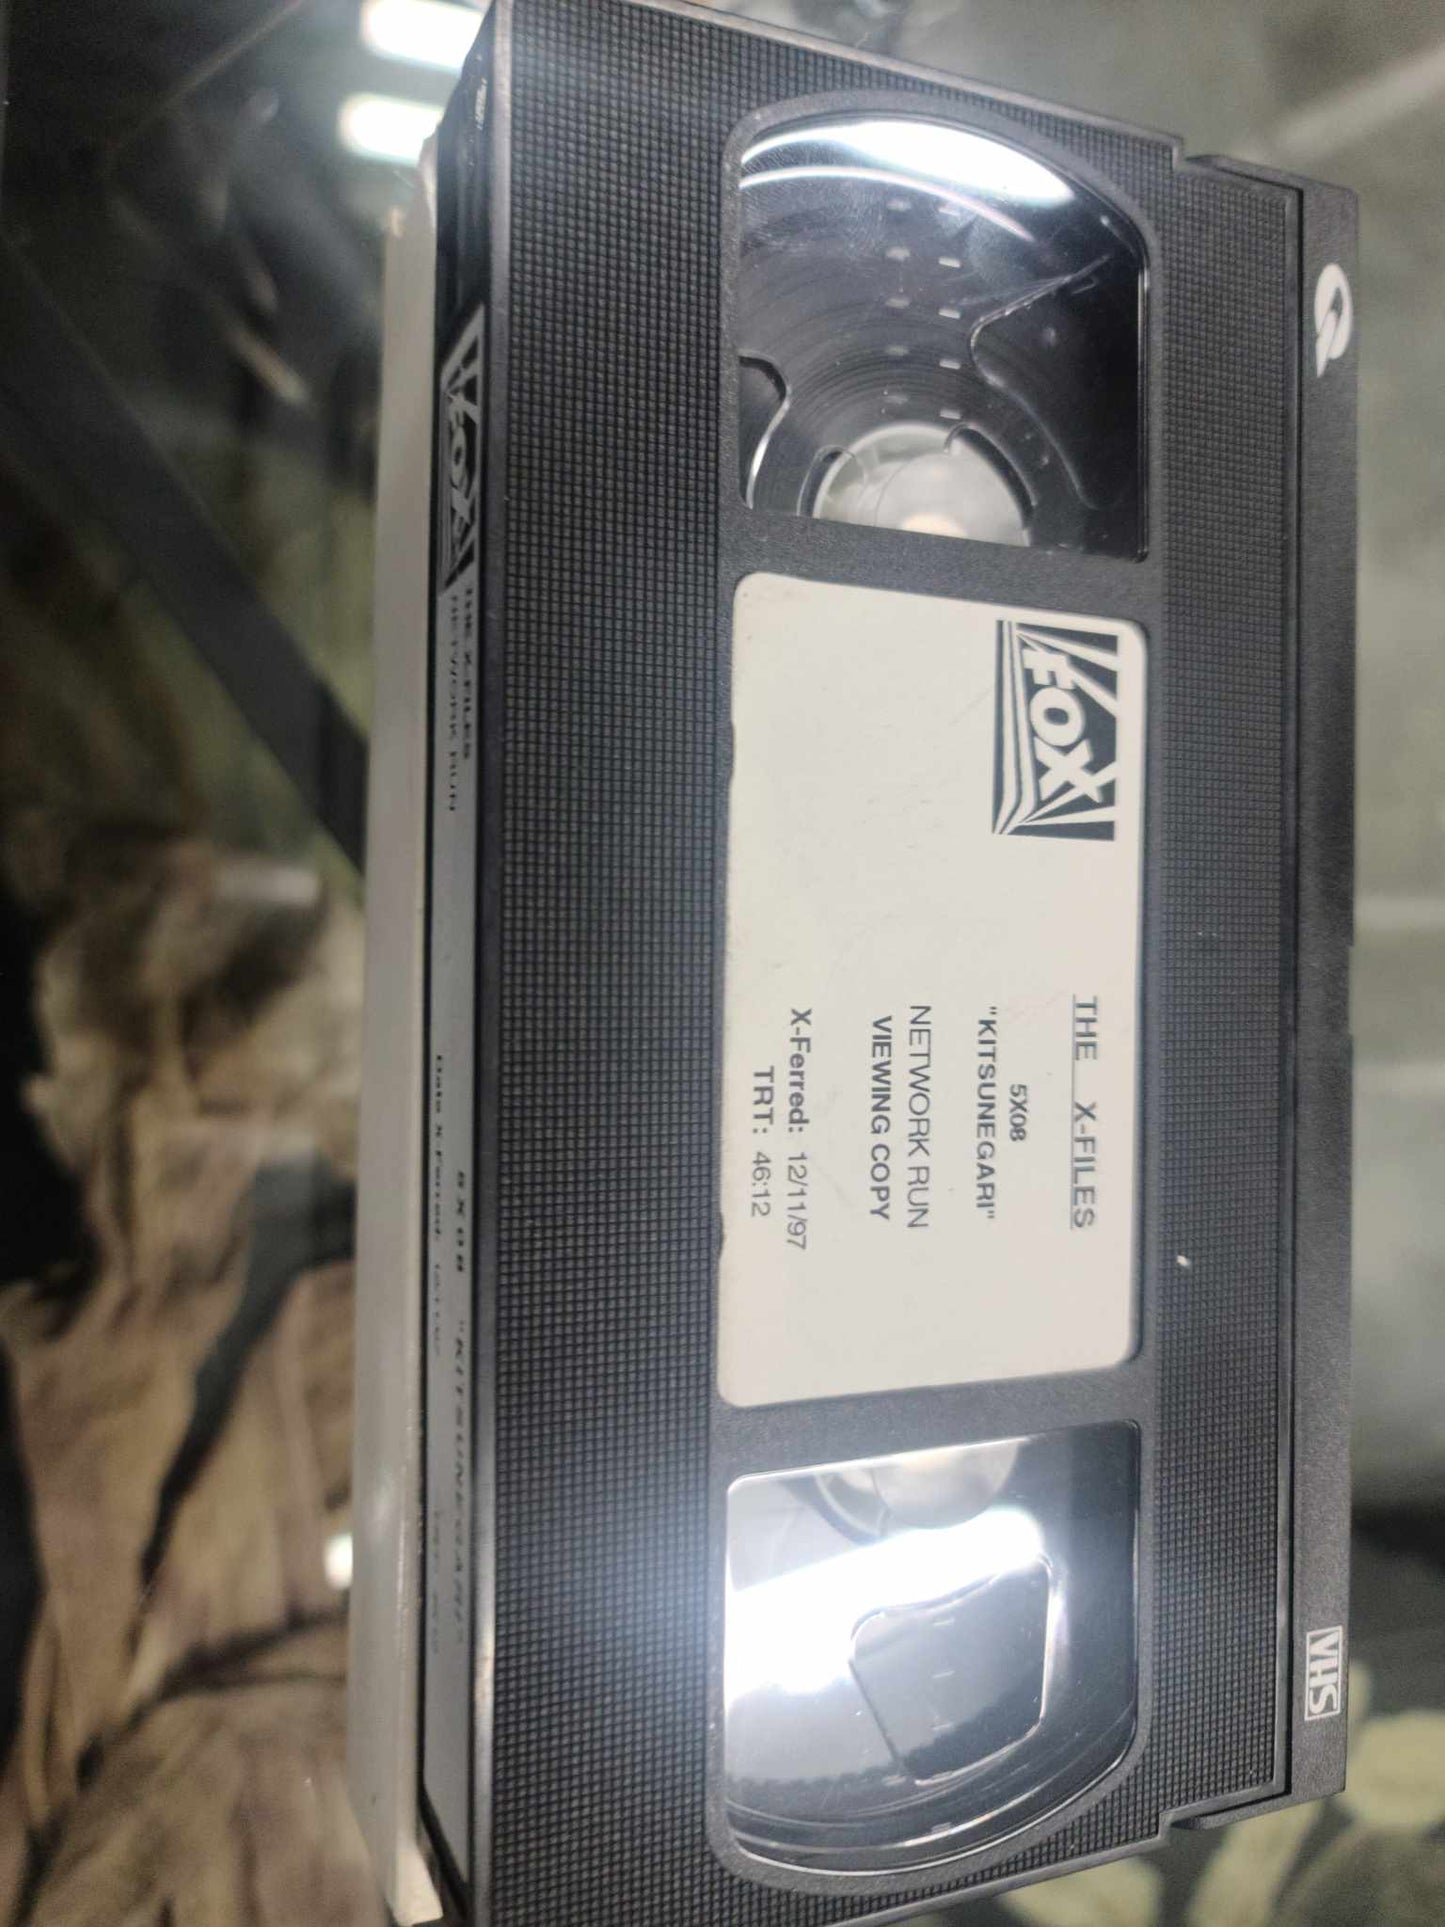 The X-Files Episode "Kitsunegari" network viewing tape (VHS)  - VERY RARE!